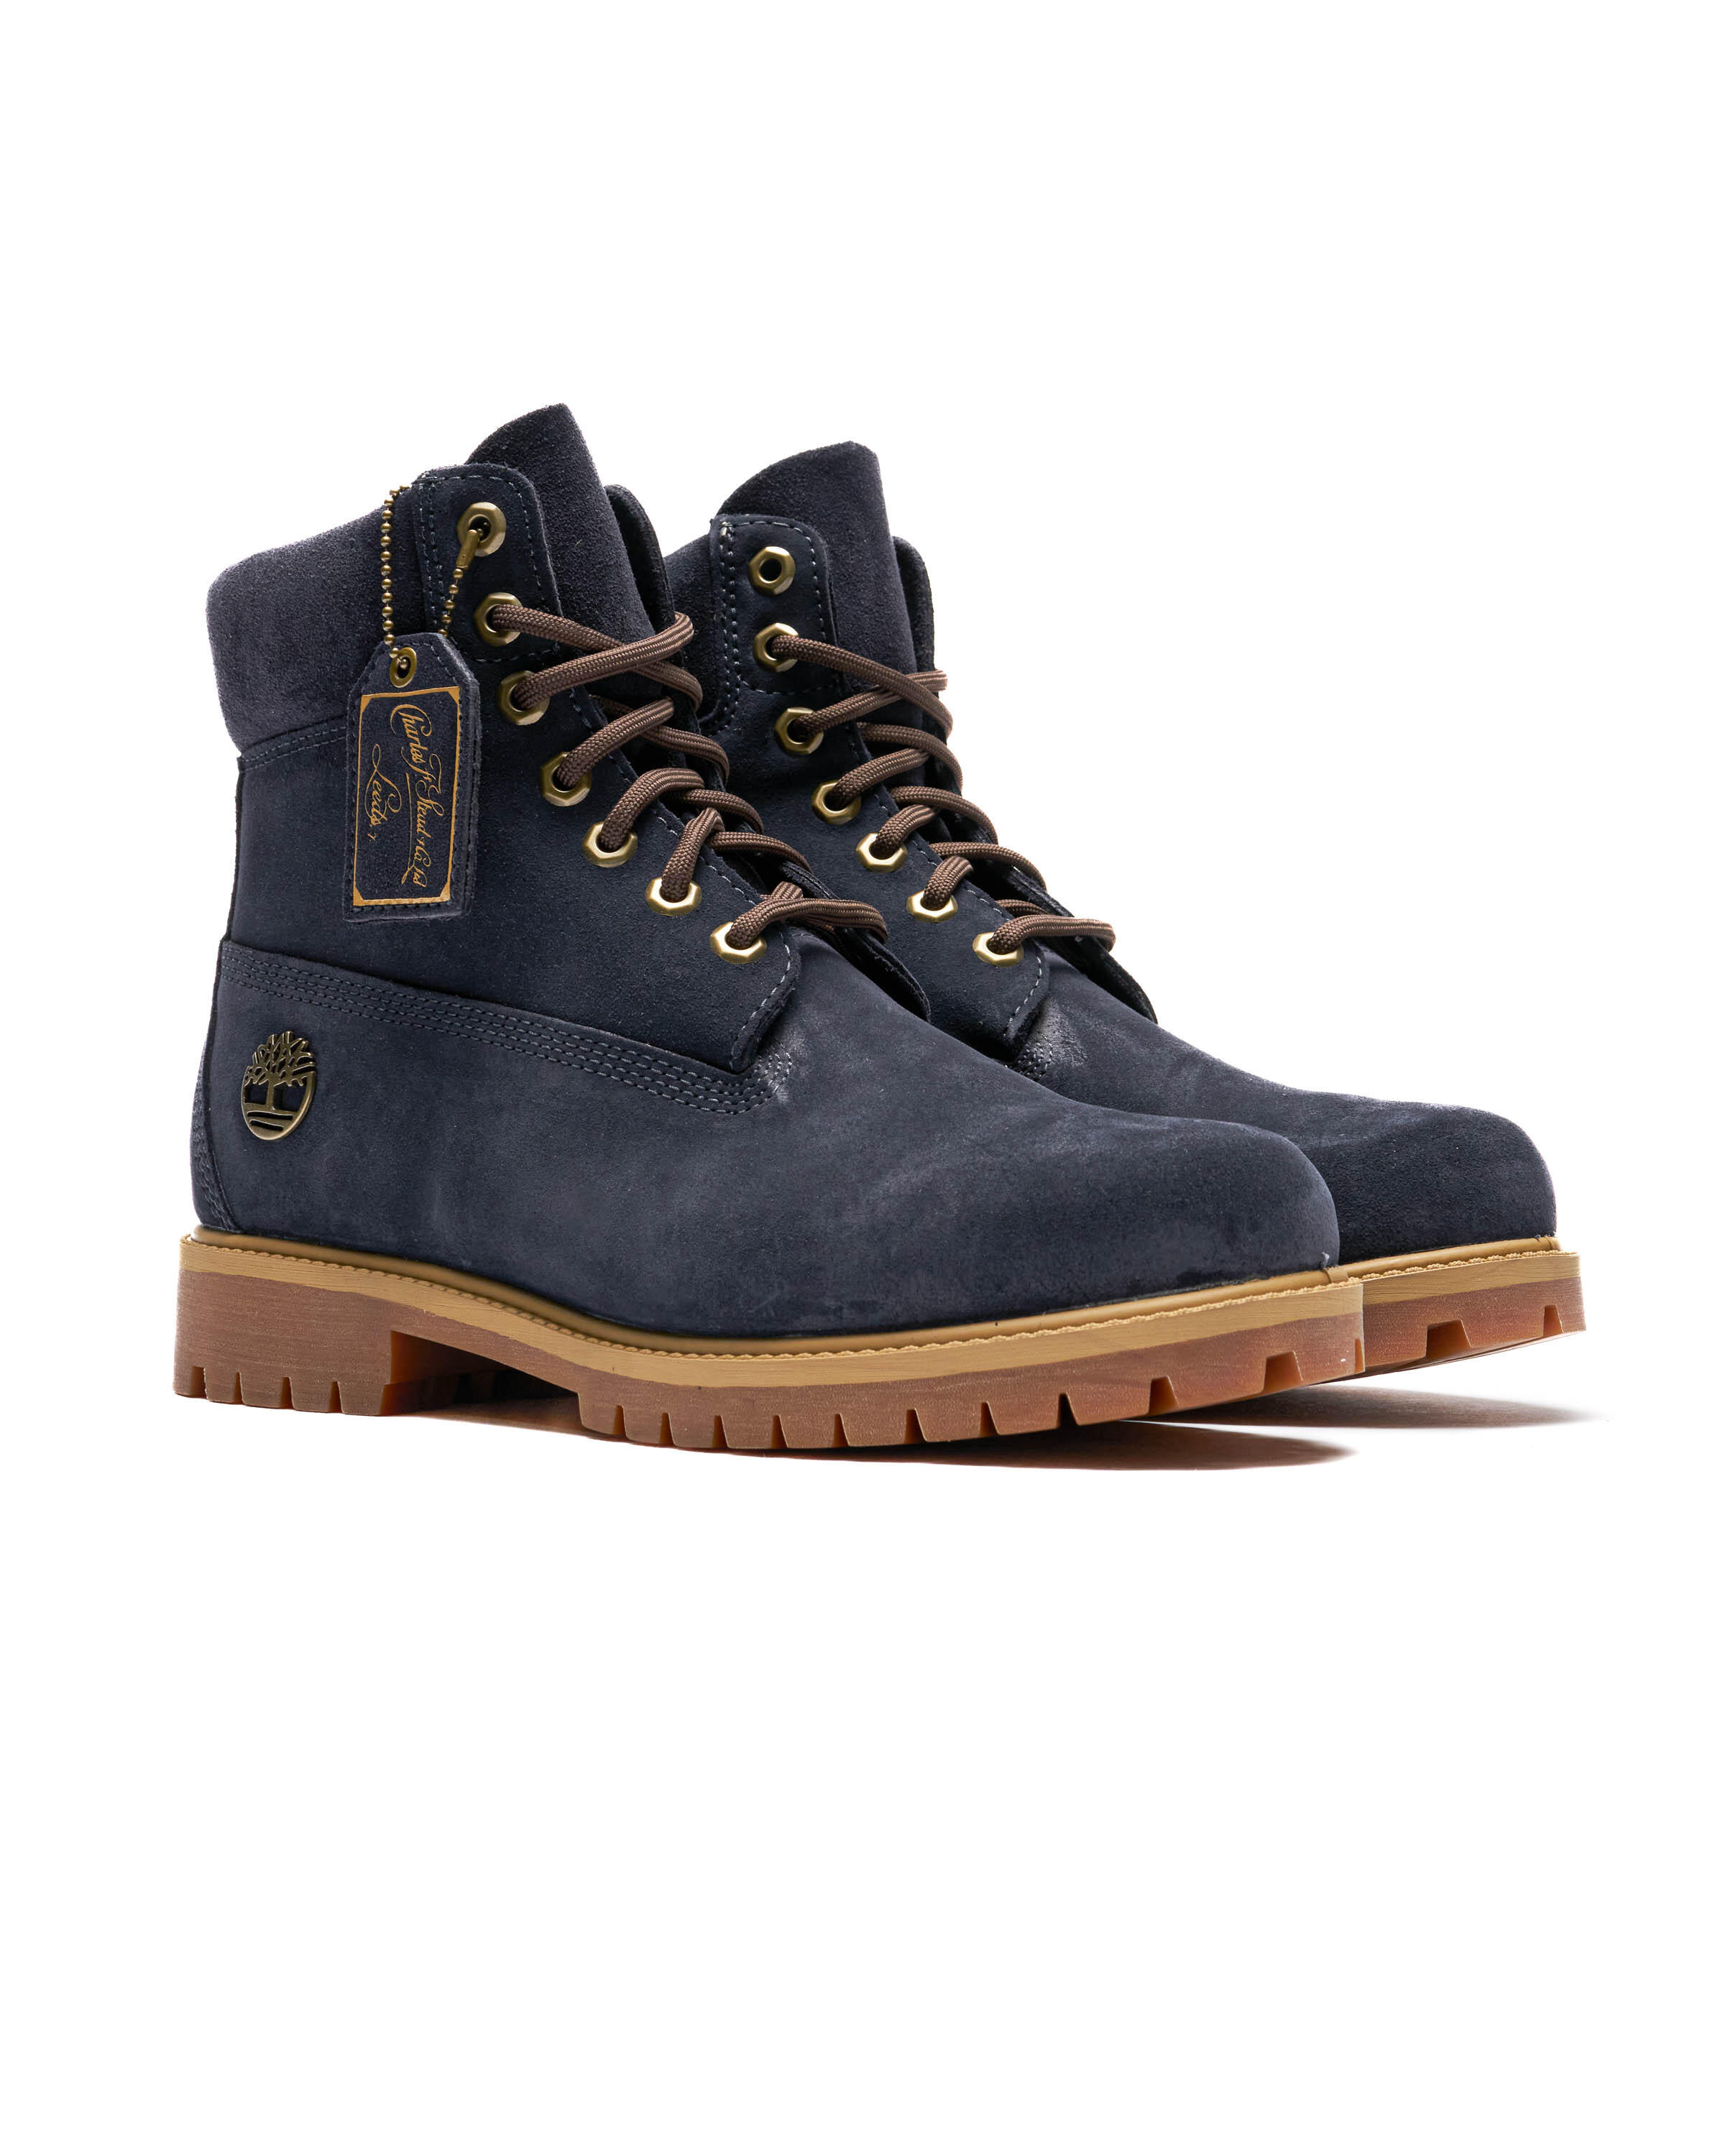 Timberland Heritage 6 INCH LACE UP WATERPROOF BOOT